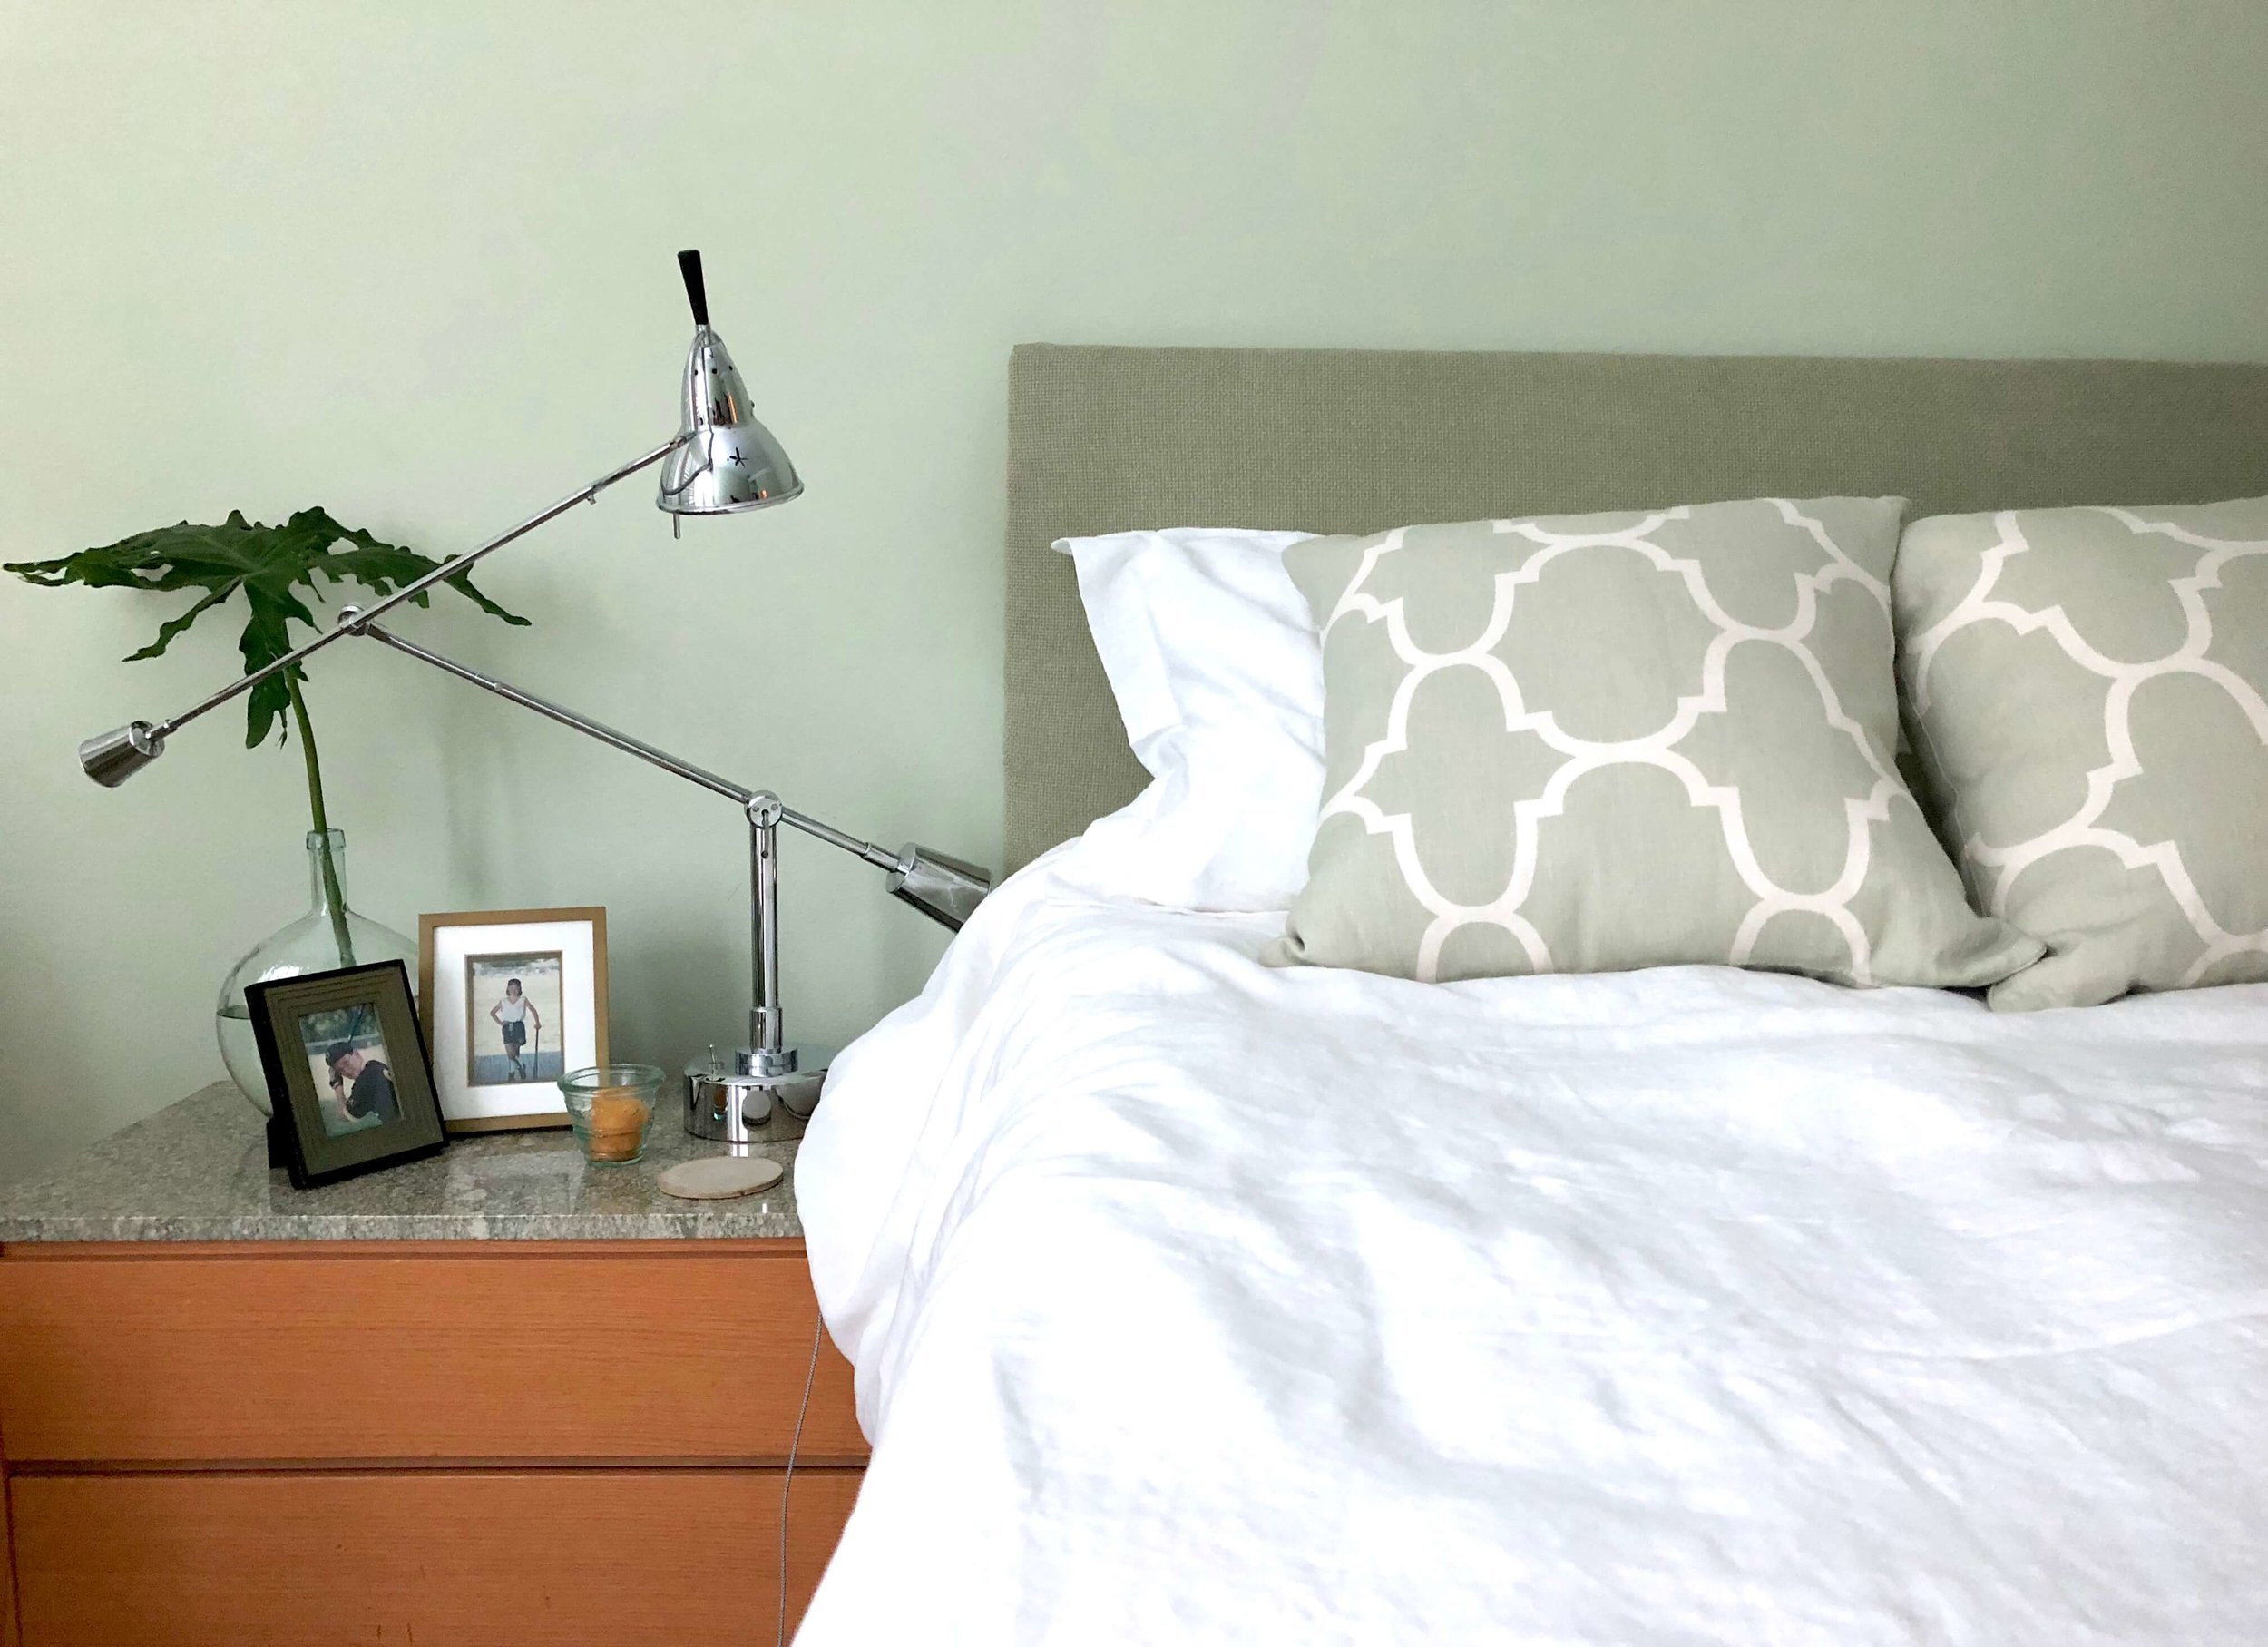 How to Find the Perfect Nightstand Height